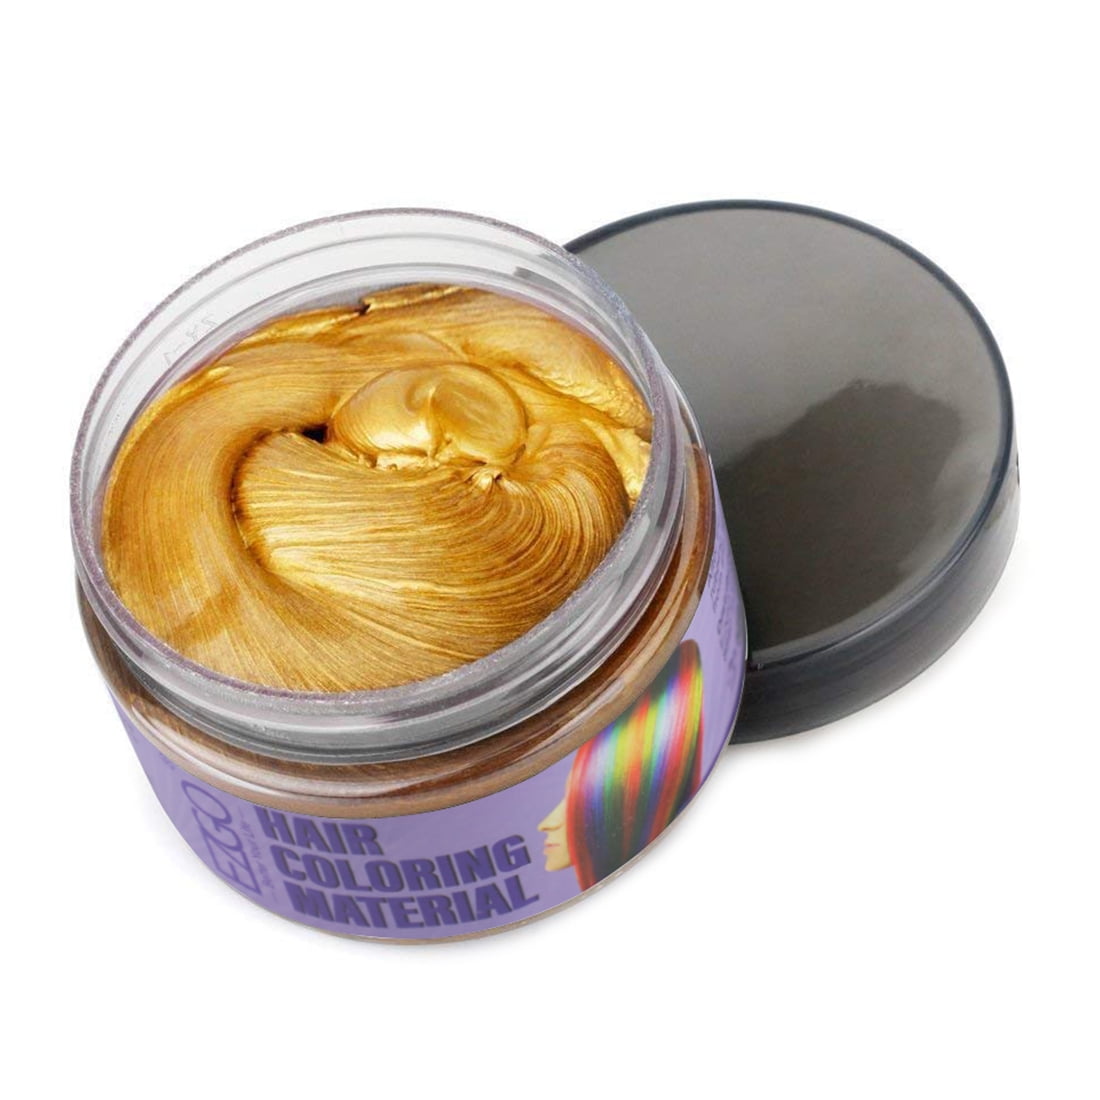 Ezgo Unisex Hair Color Wax Mud Dye Cream Temporary Modeling Hairstyling Washable Gold 120g